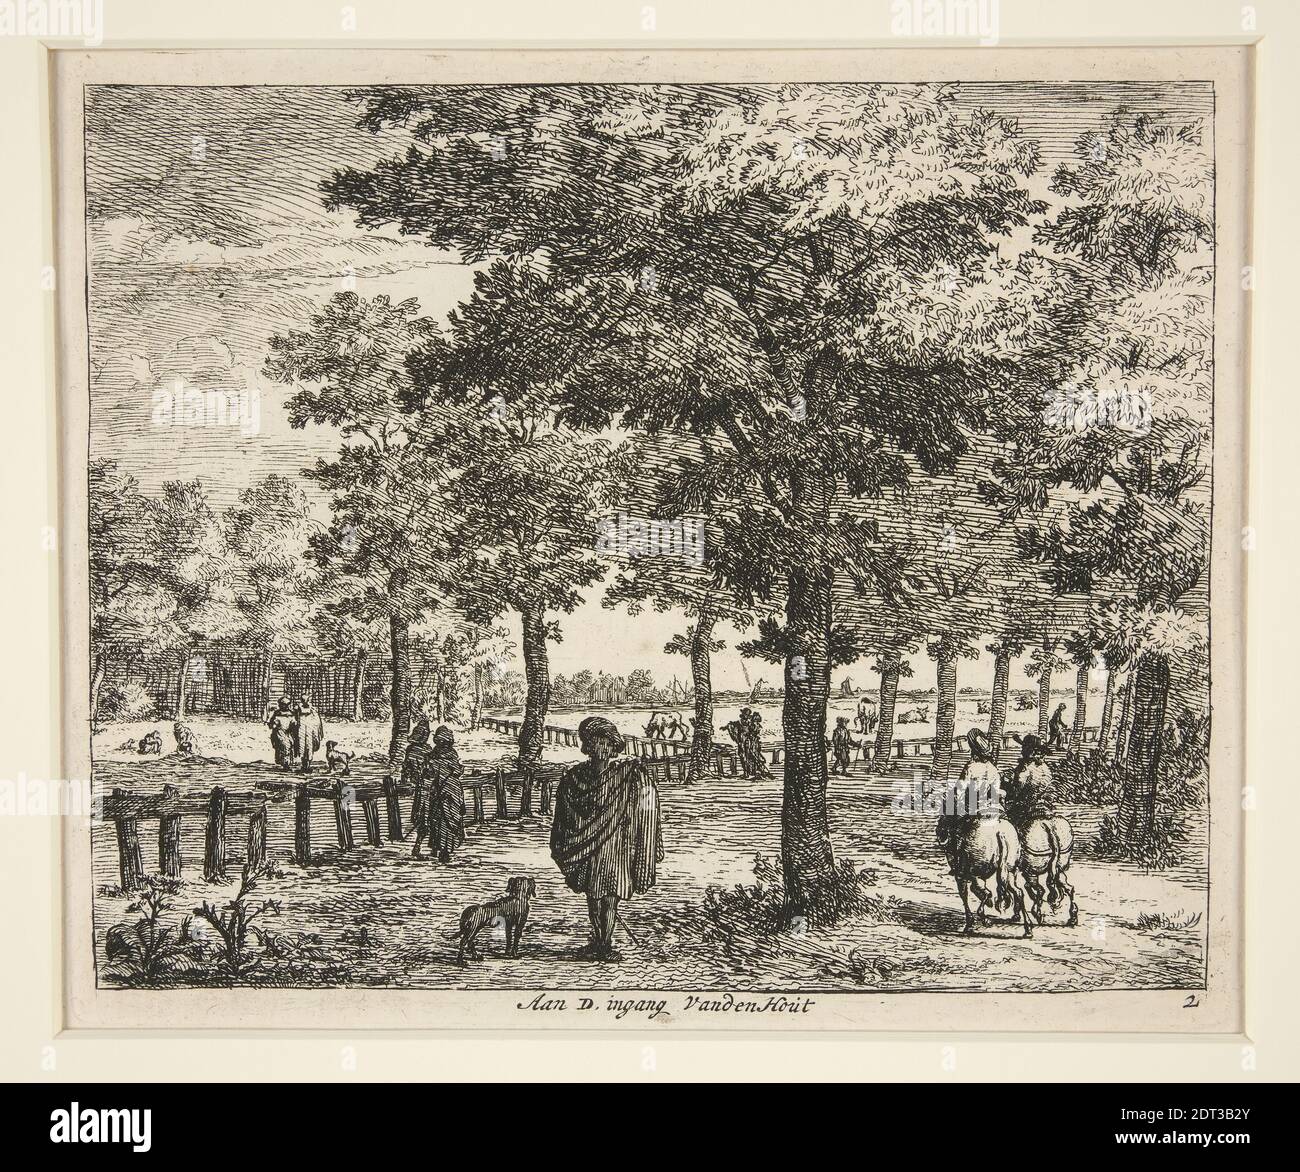 Aan d. ingang Vanden Harit (At The entrance to the Vanden Harit), Etching, platemark: 15.4 × 18.6 cm (6 1/16 × 7 5/16 in.), Made in The Netherlands, Dutch, possibly 17th century, Works on Paper - Prints Stock Photo